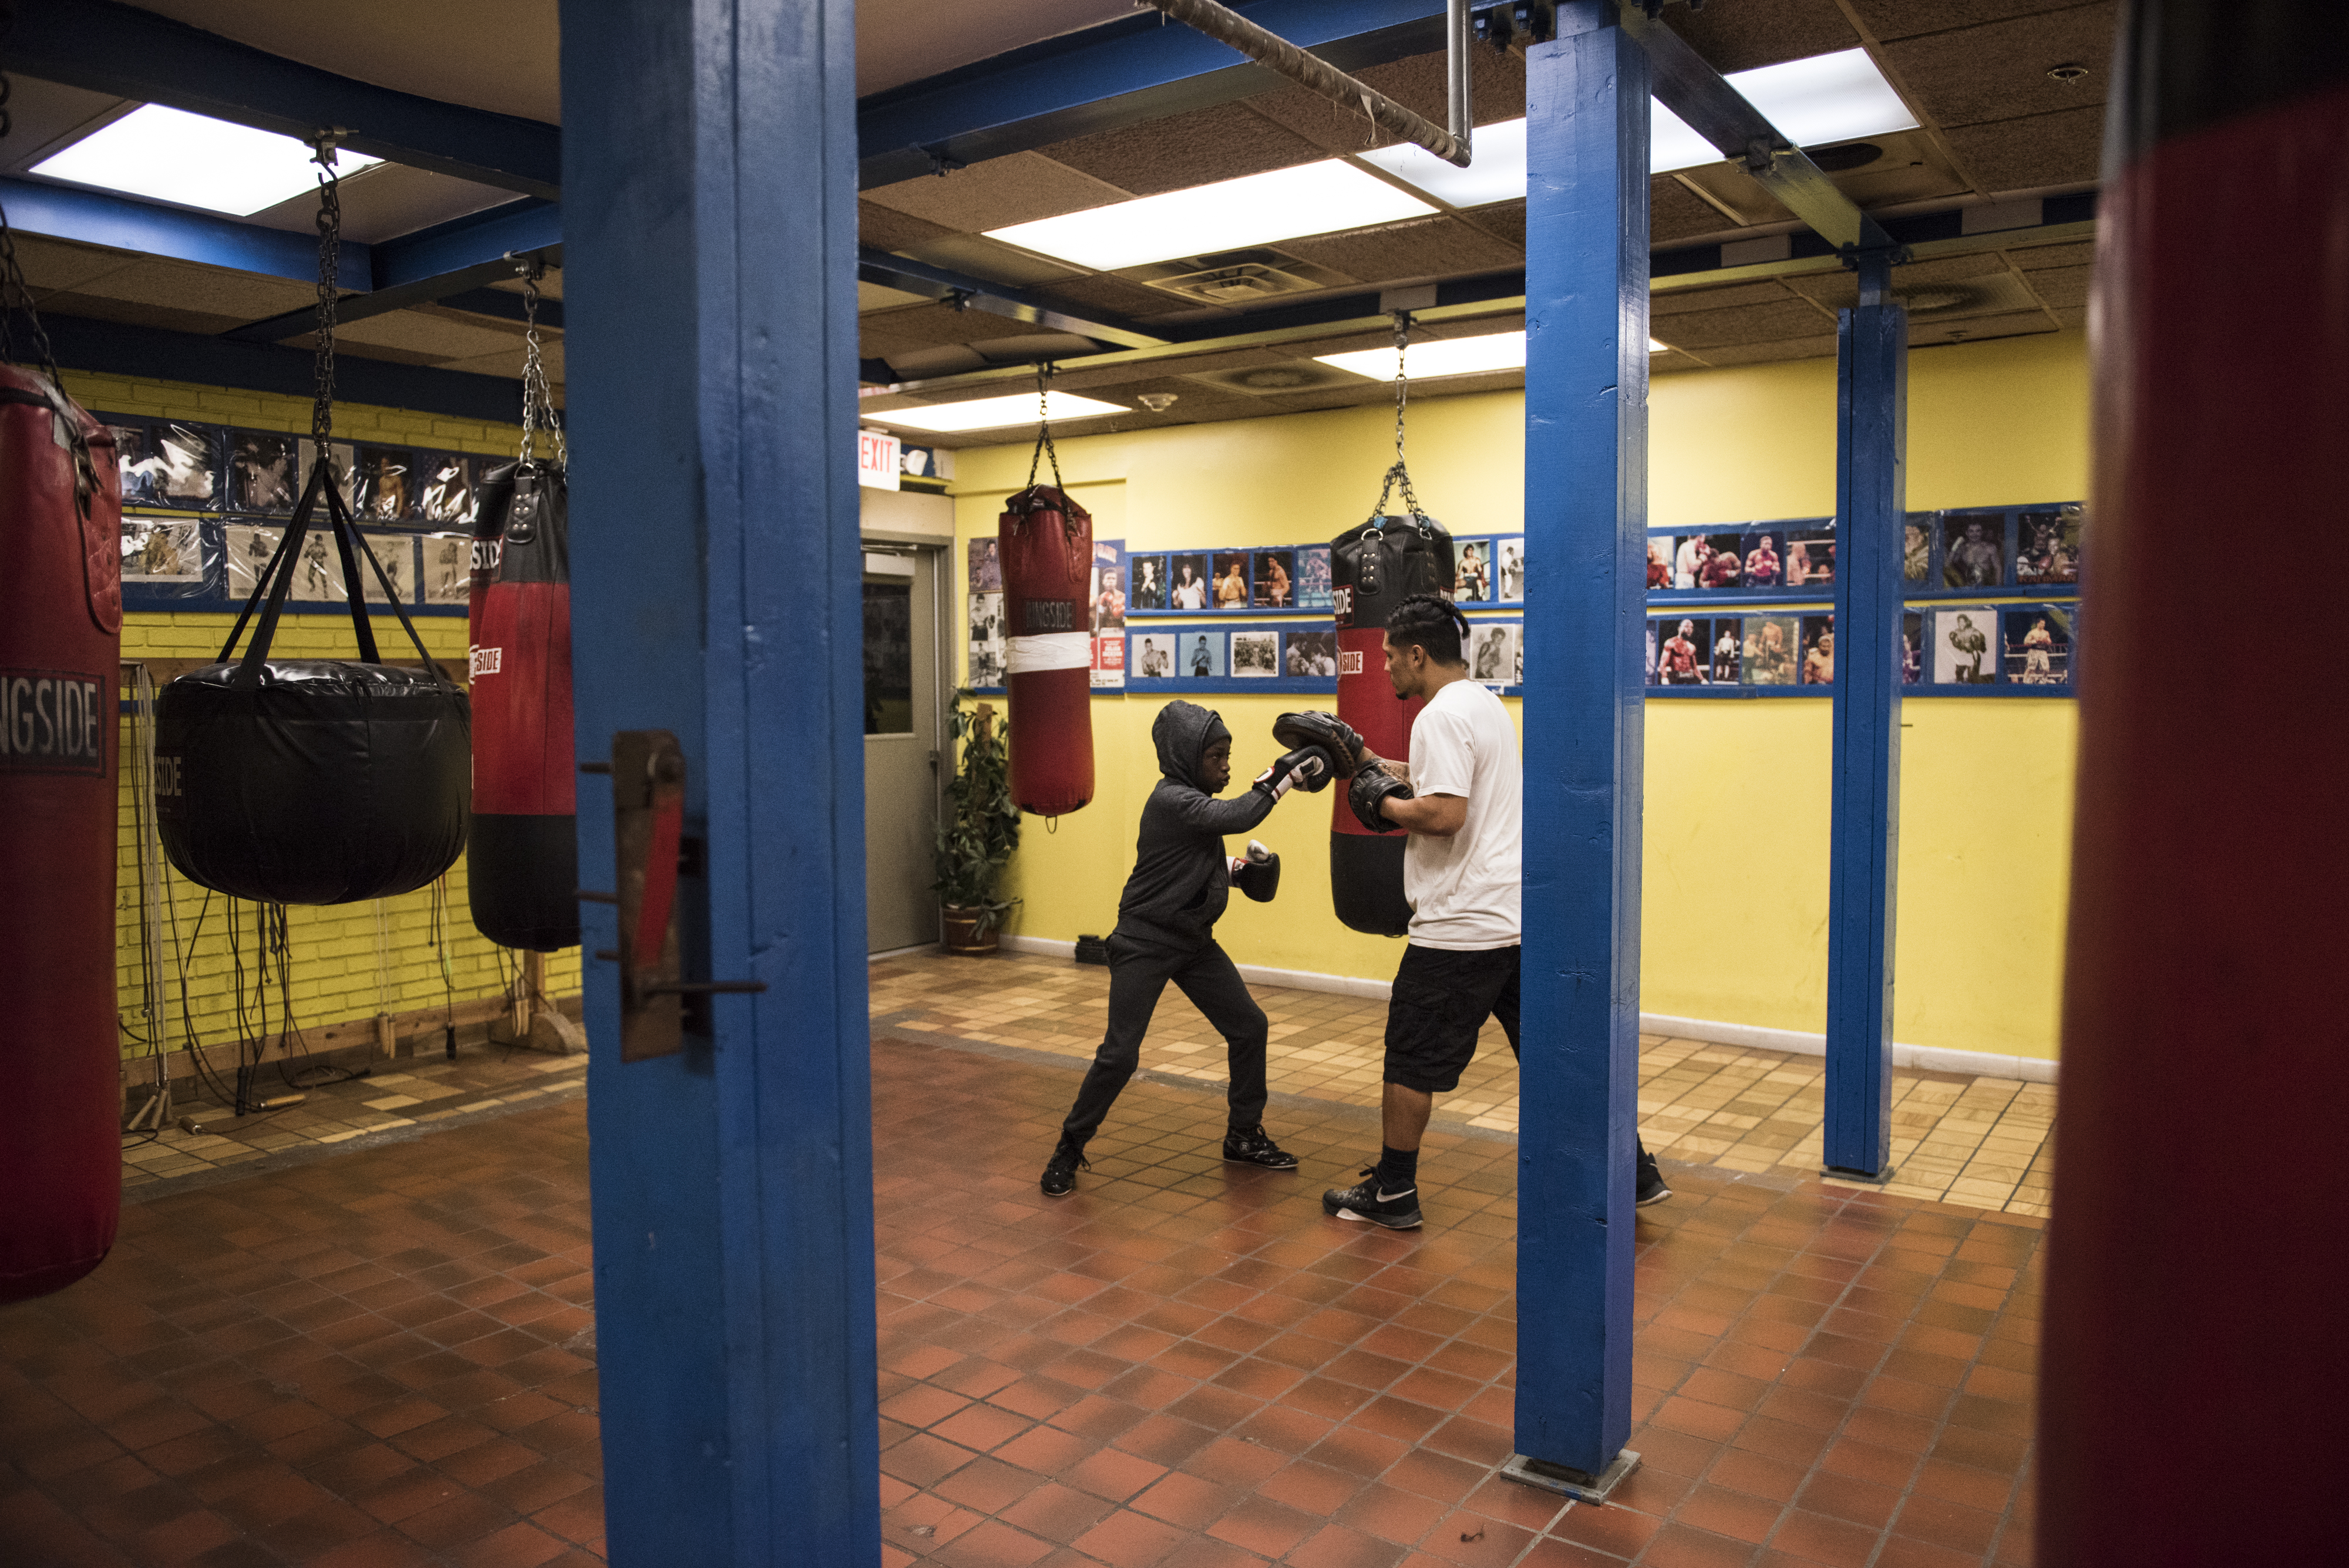 Lungz practices the mitts with professional Syracuse boxer Luis Vargas.